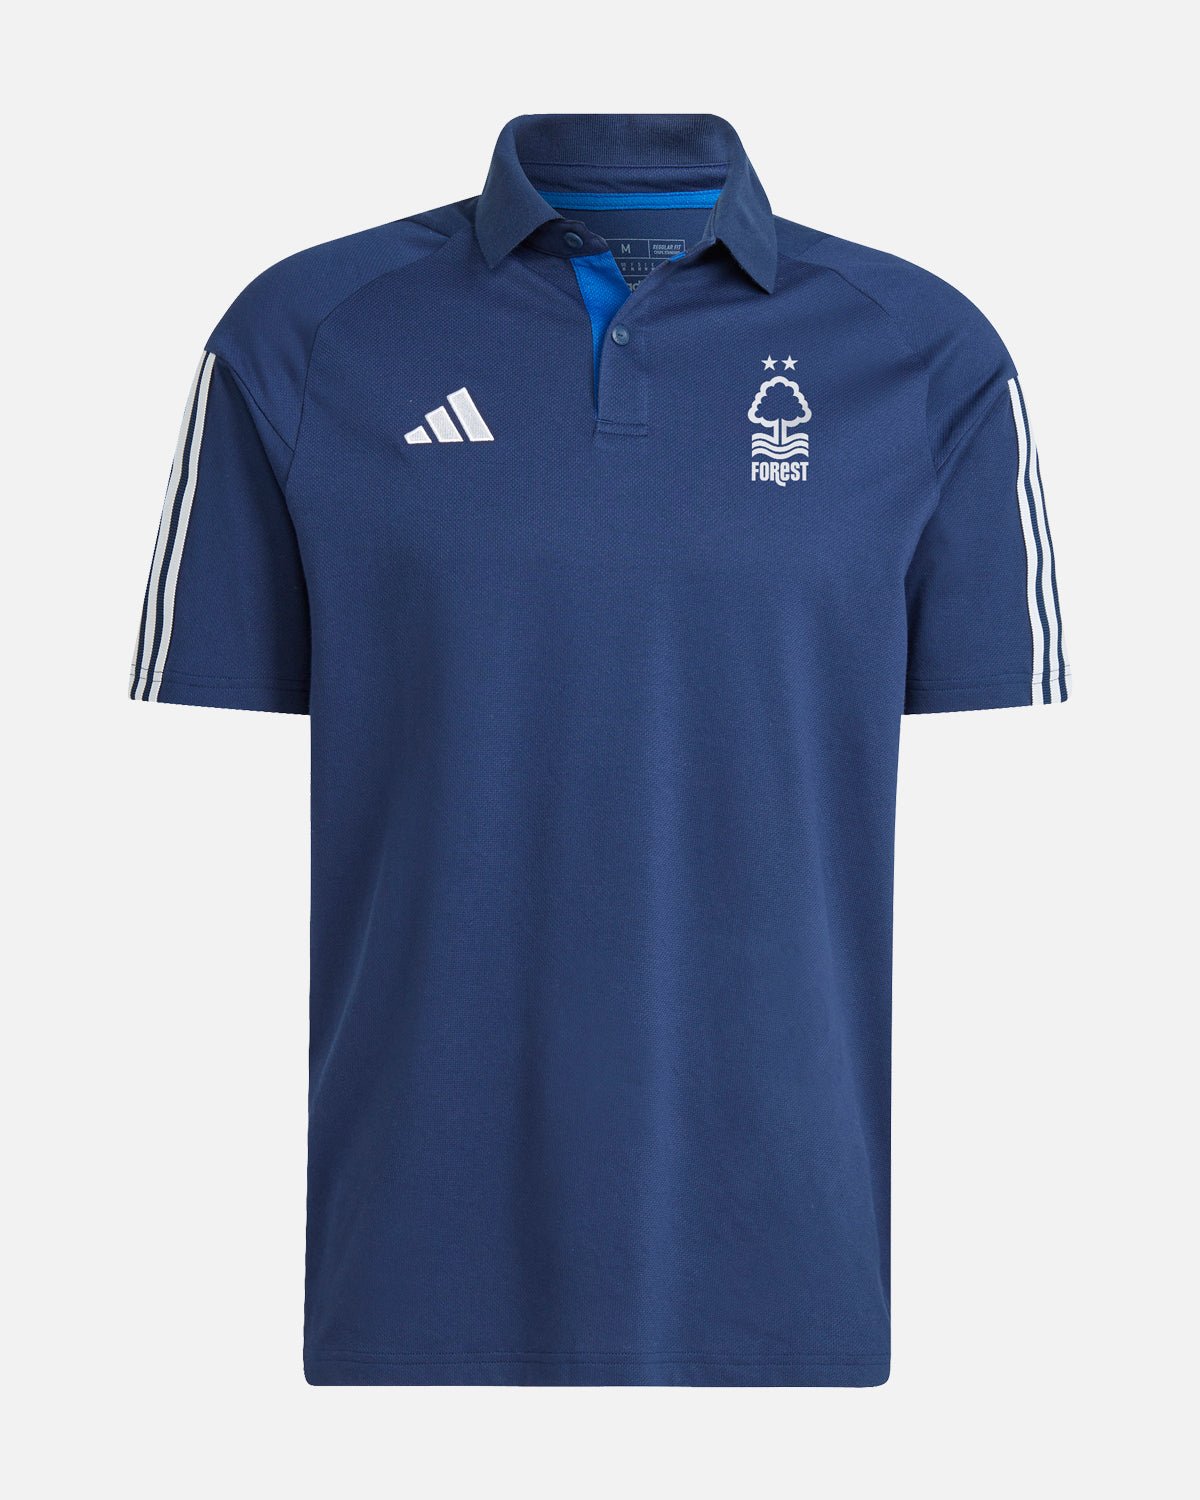 NFFC Navy Travel Polo 23-24 - Nottingham Forest FC